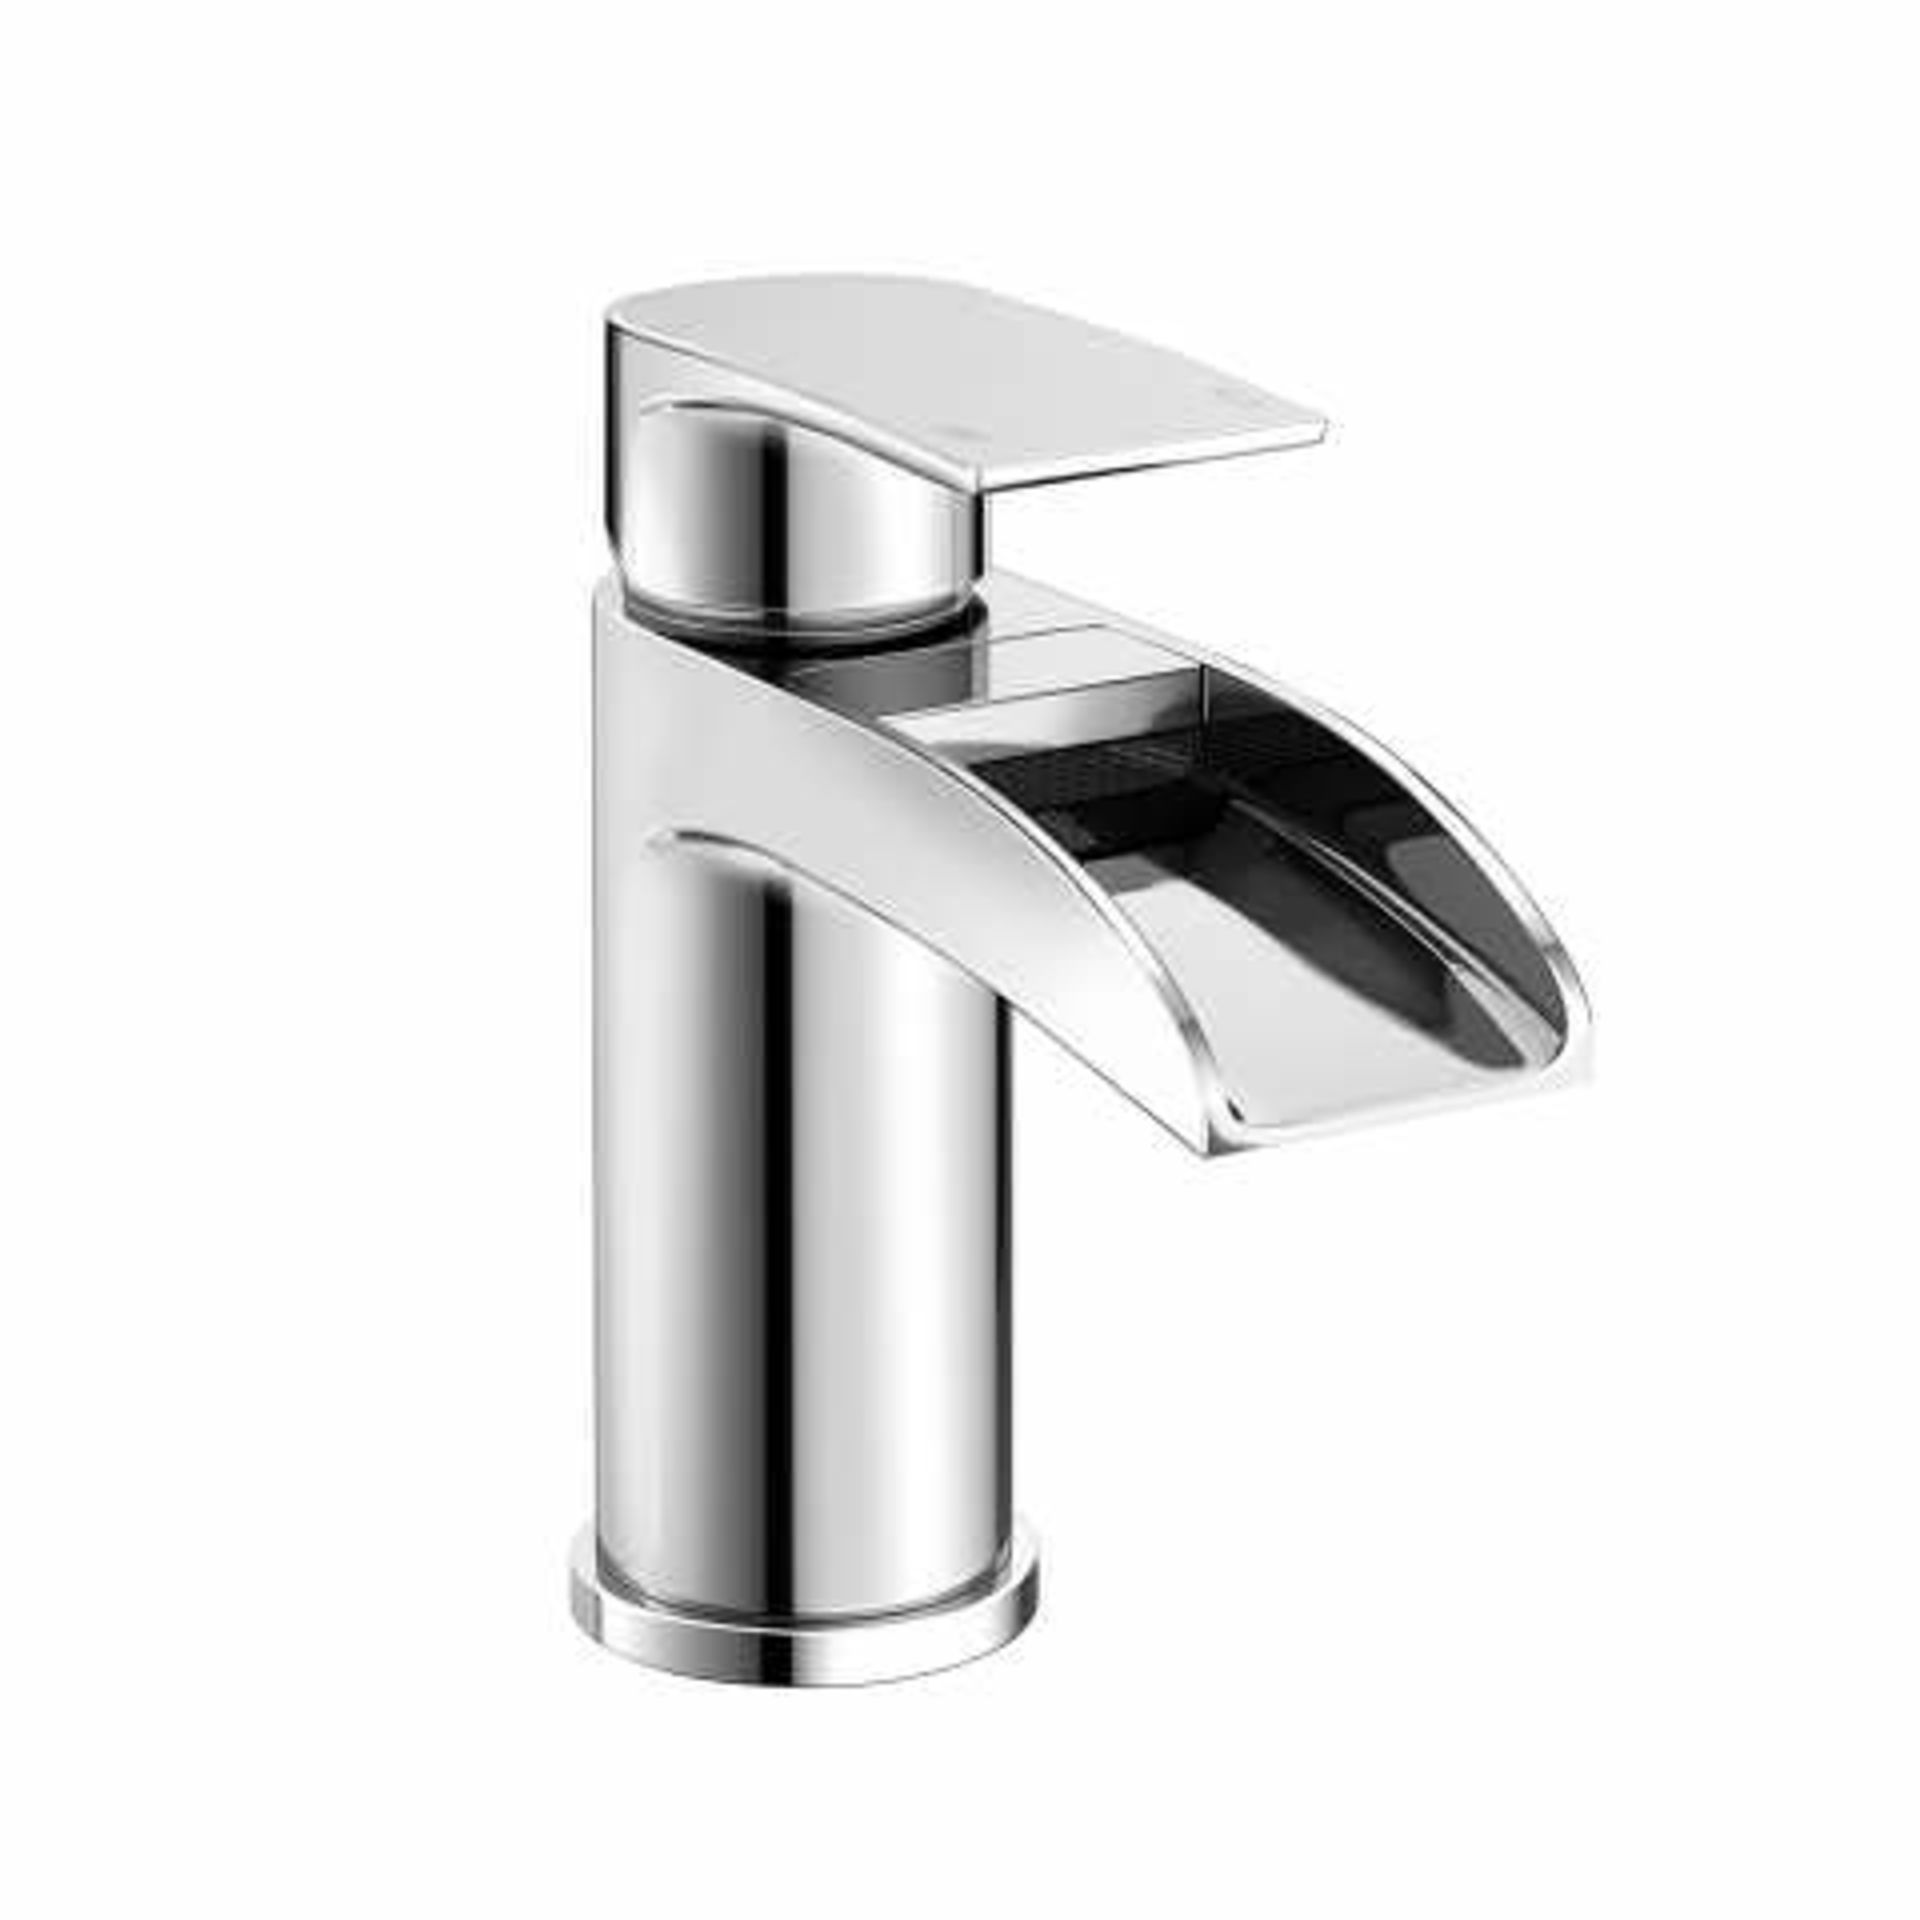 (H41) Avis II Waterfall Basin Mixer Tap Waterfall Feature Our range of waterfall taps add a touch of - Bild 3 aus 3